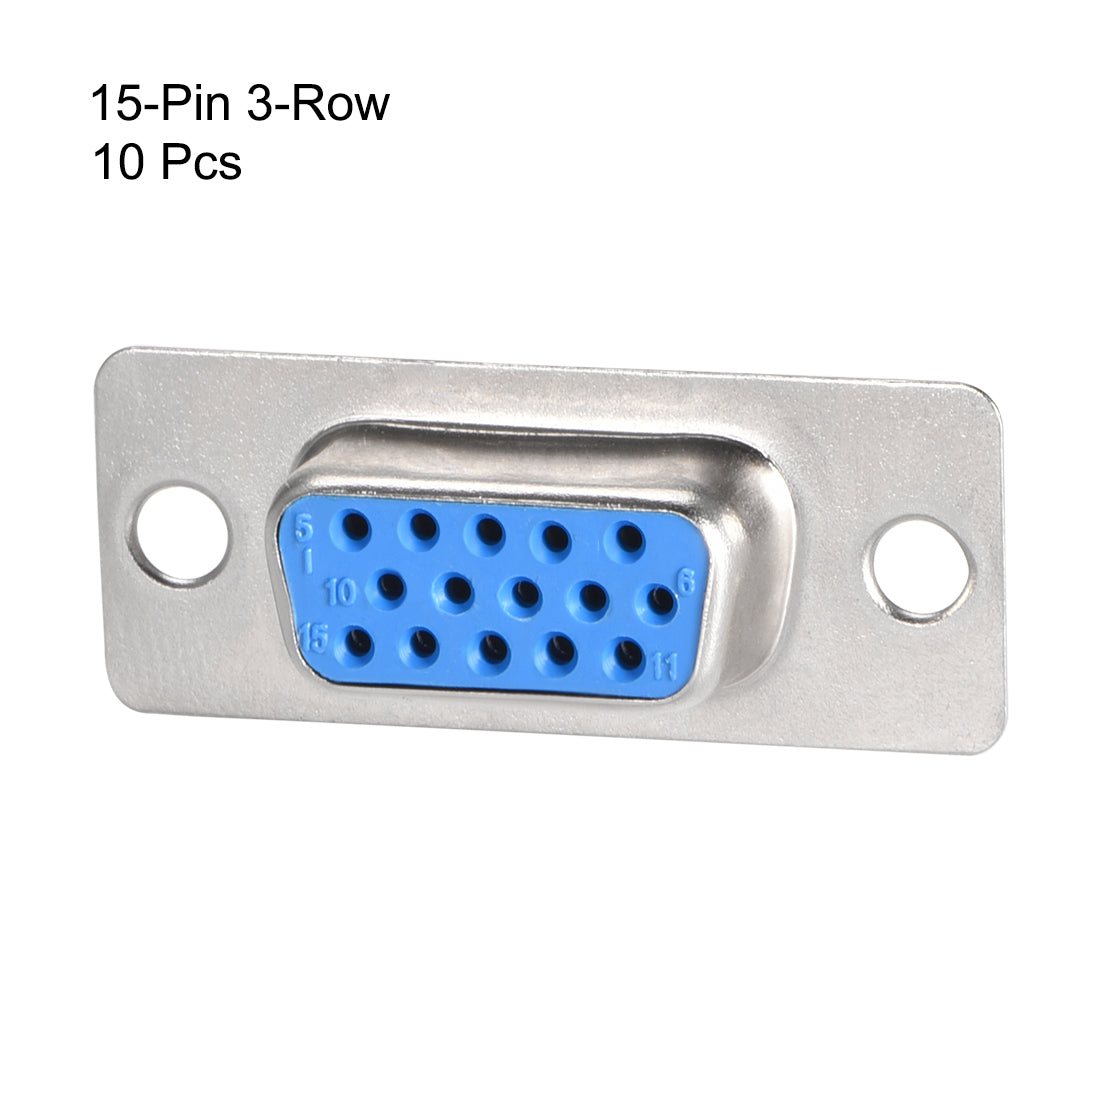 uxcell Uxcell D-sub Connector Female Socket 15-pin 3-row Port Terminal Breakout for Mechanical Equipment CNC Computers 10pcs